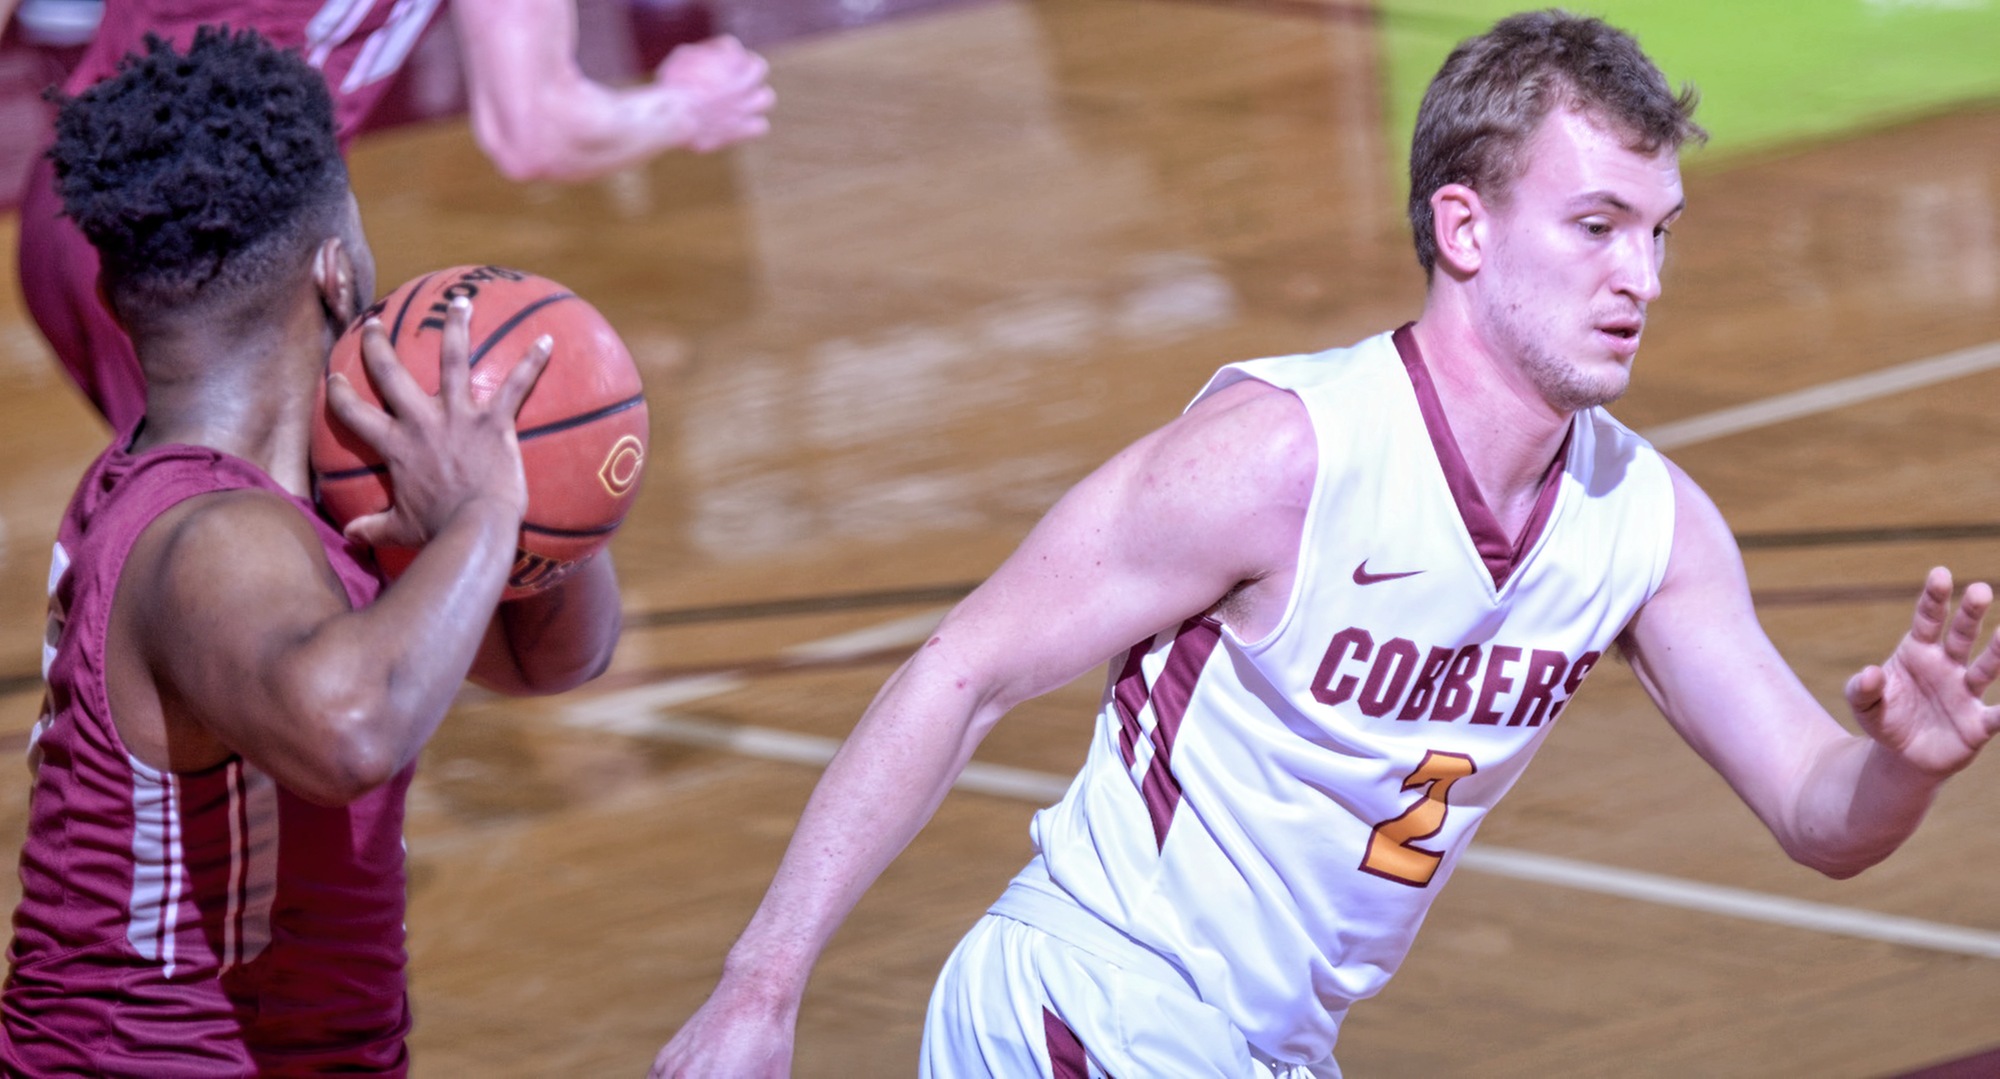 Senior Austin Rund tied his season high point total in the Cobbers' game at Hamline.